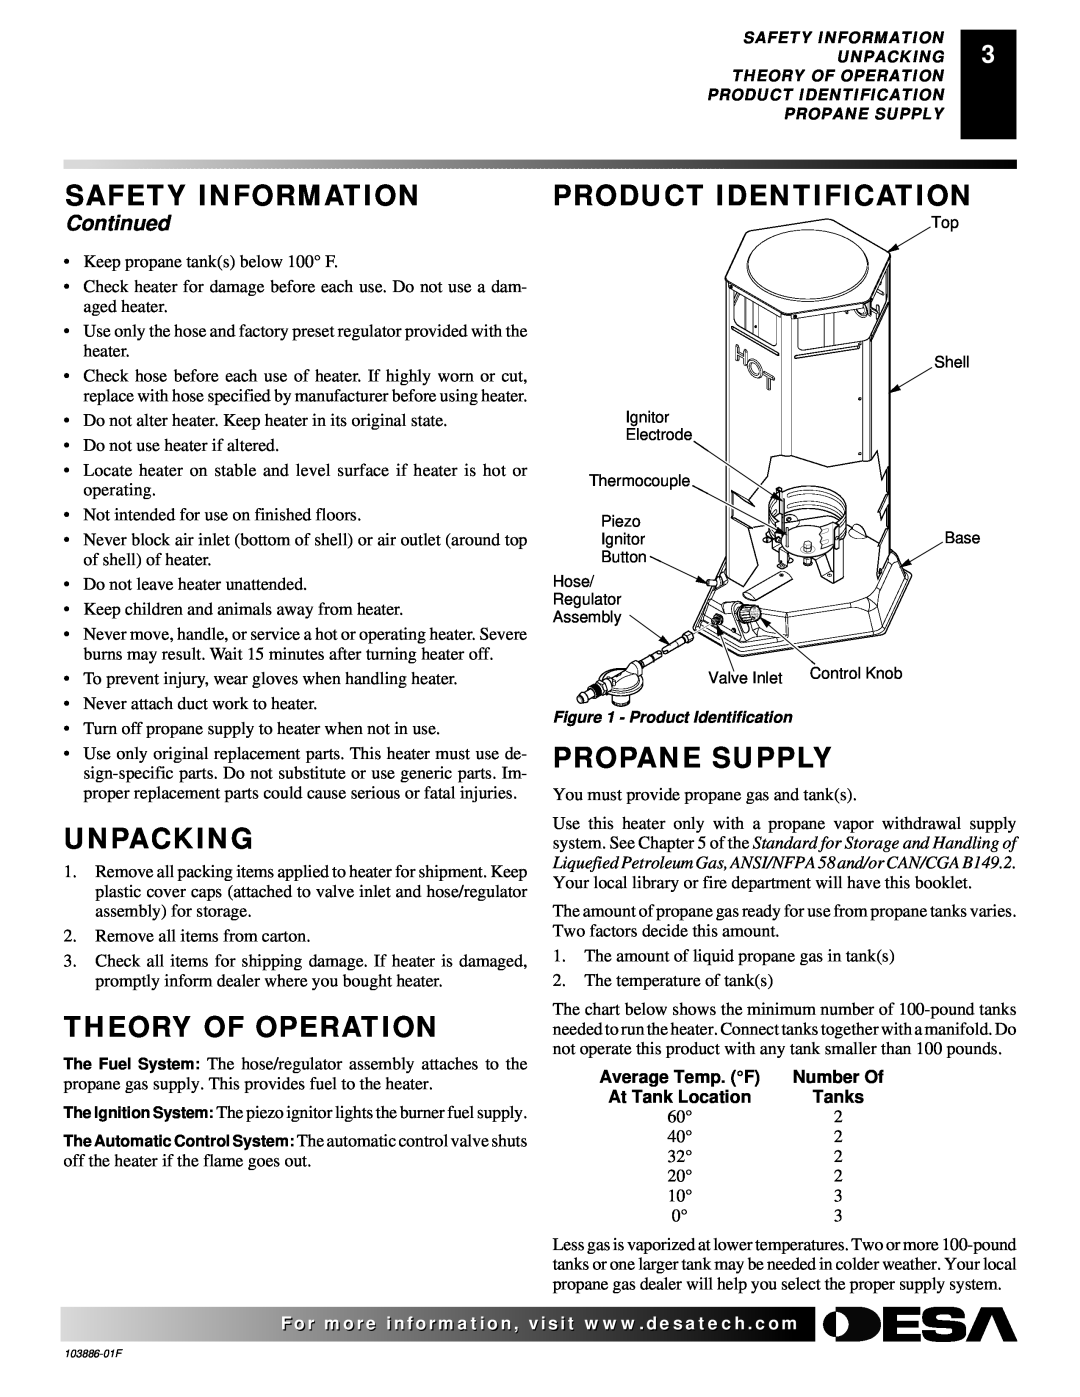 Desa RCP200V Product Identification, Unpacking, Theory Of Operation, Propane Supply, Continued, Safety Information, Tanks 